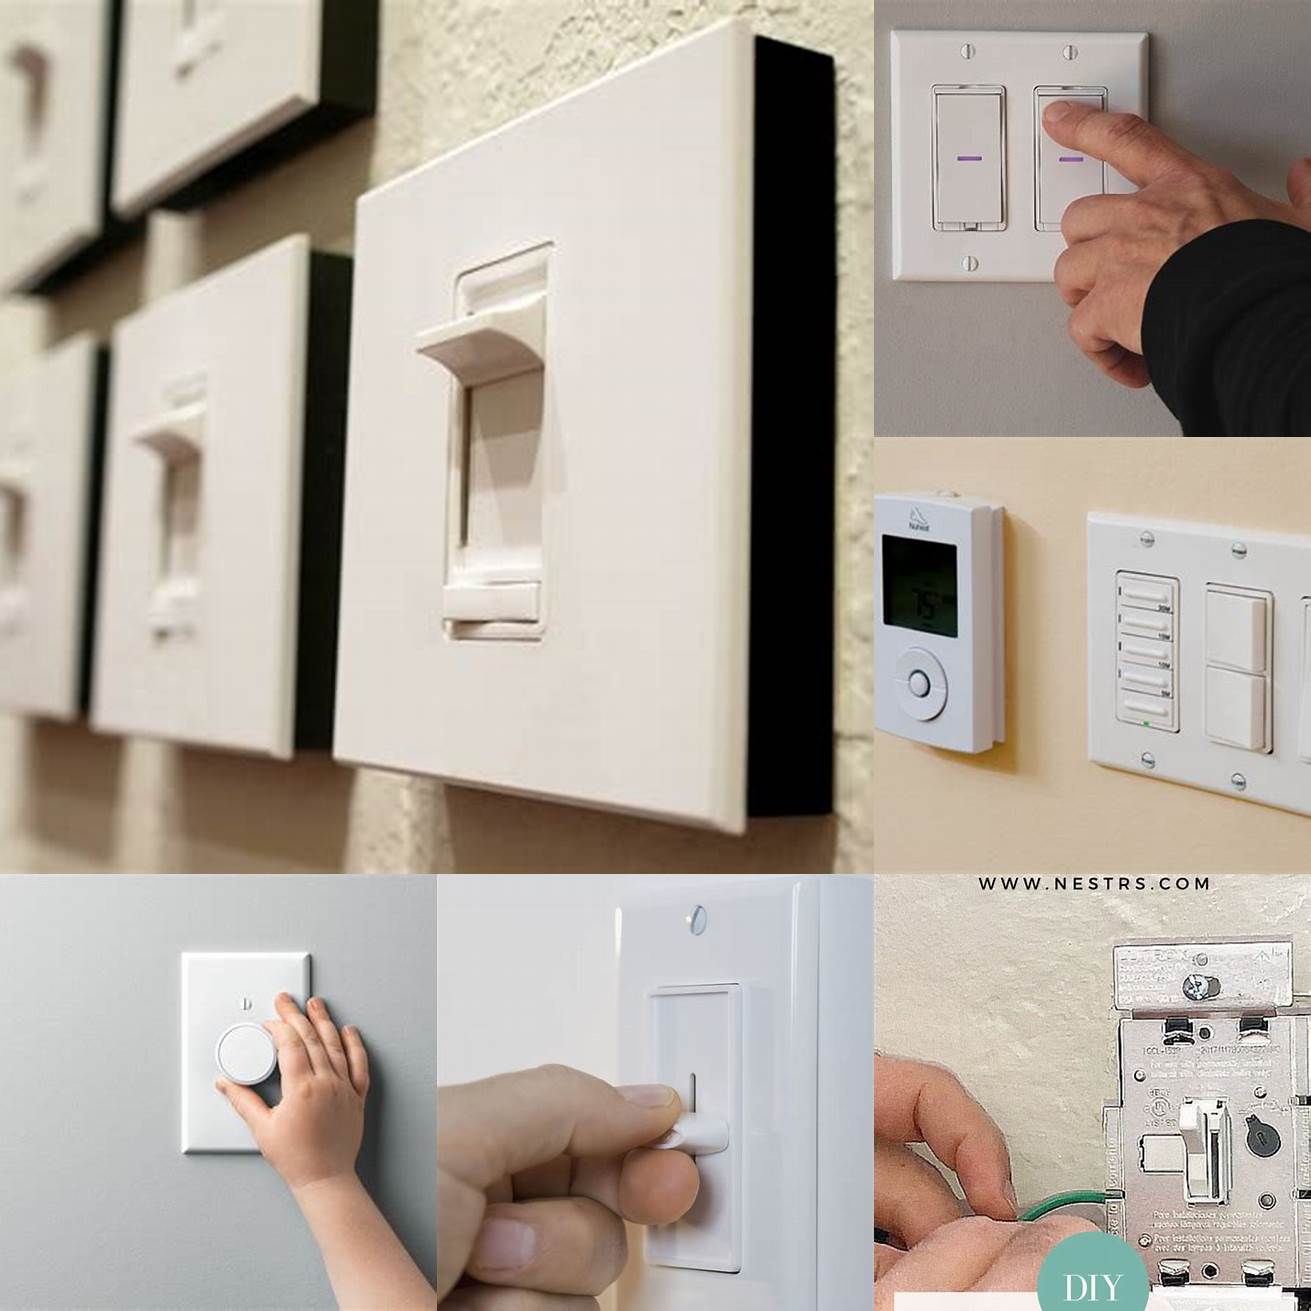 Install dimmer switches to create a cozy and relaxing atmosphere in your bathroom